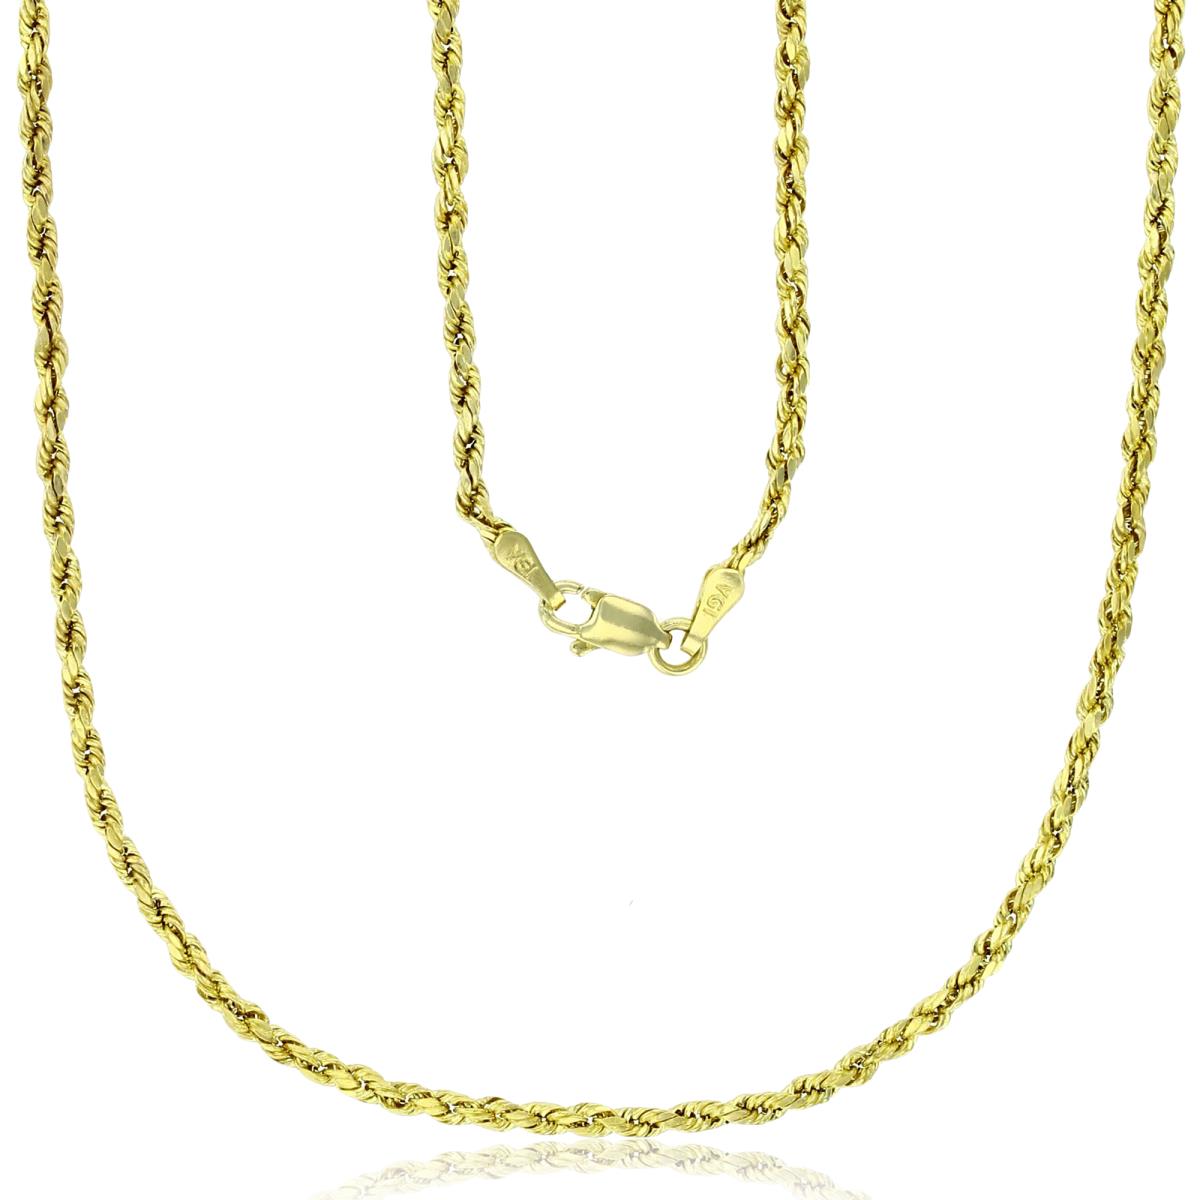 10k Yellow Gold 2mm DC Hollow Rope 016 10" Chain Anklet